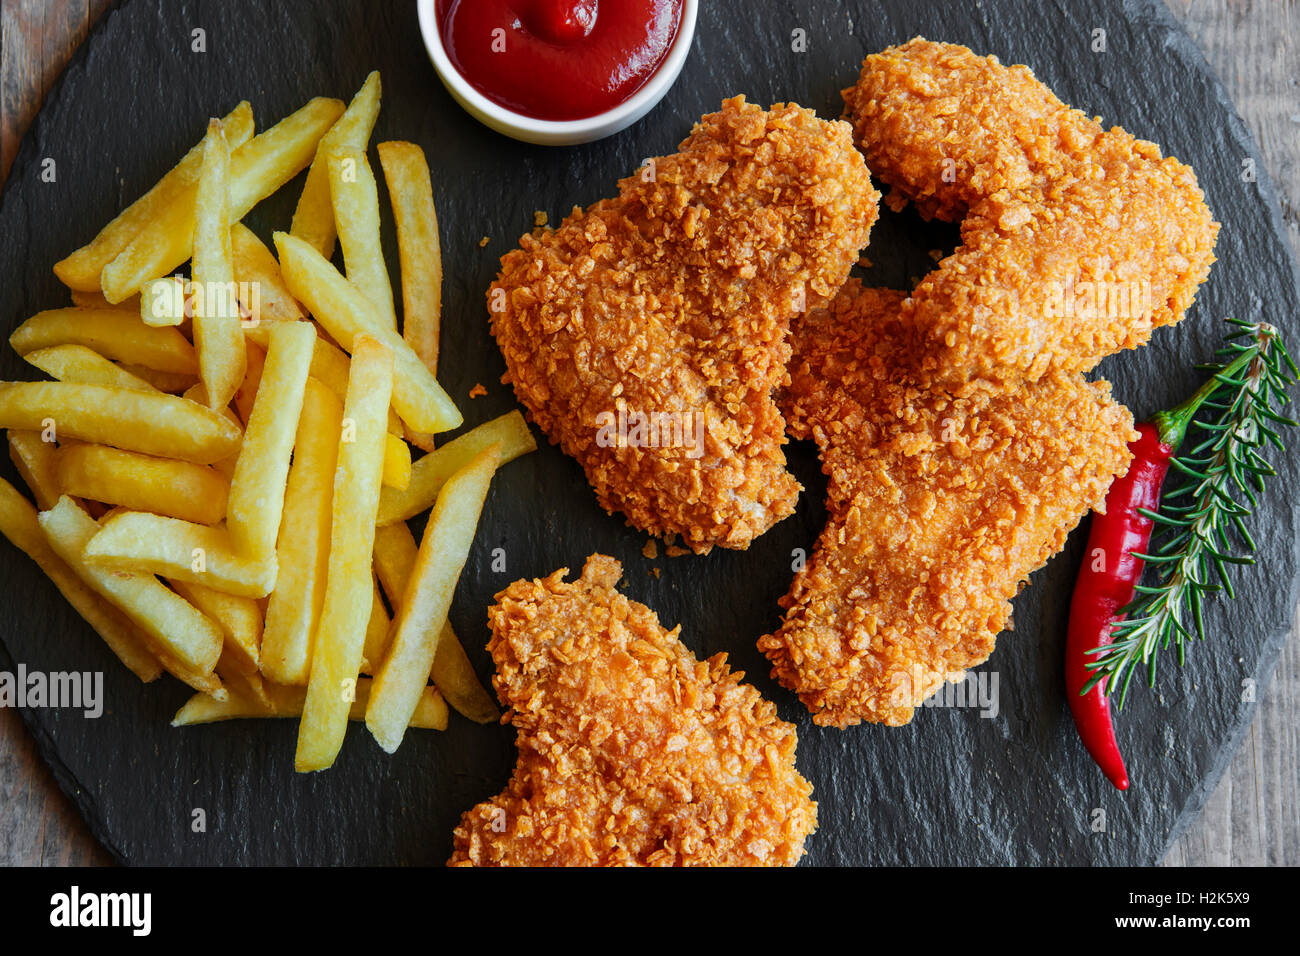 Breaded crispy chicken wing fried french fries sauce Stock Photo